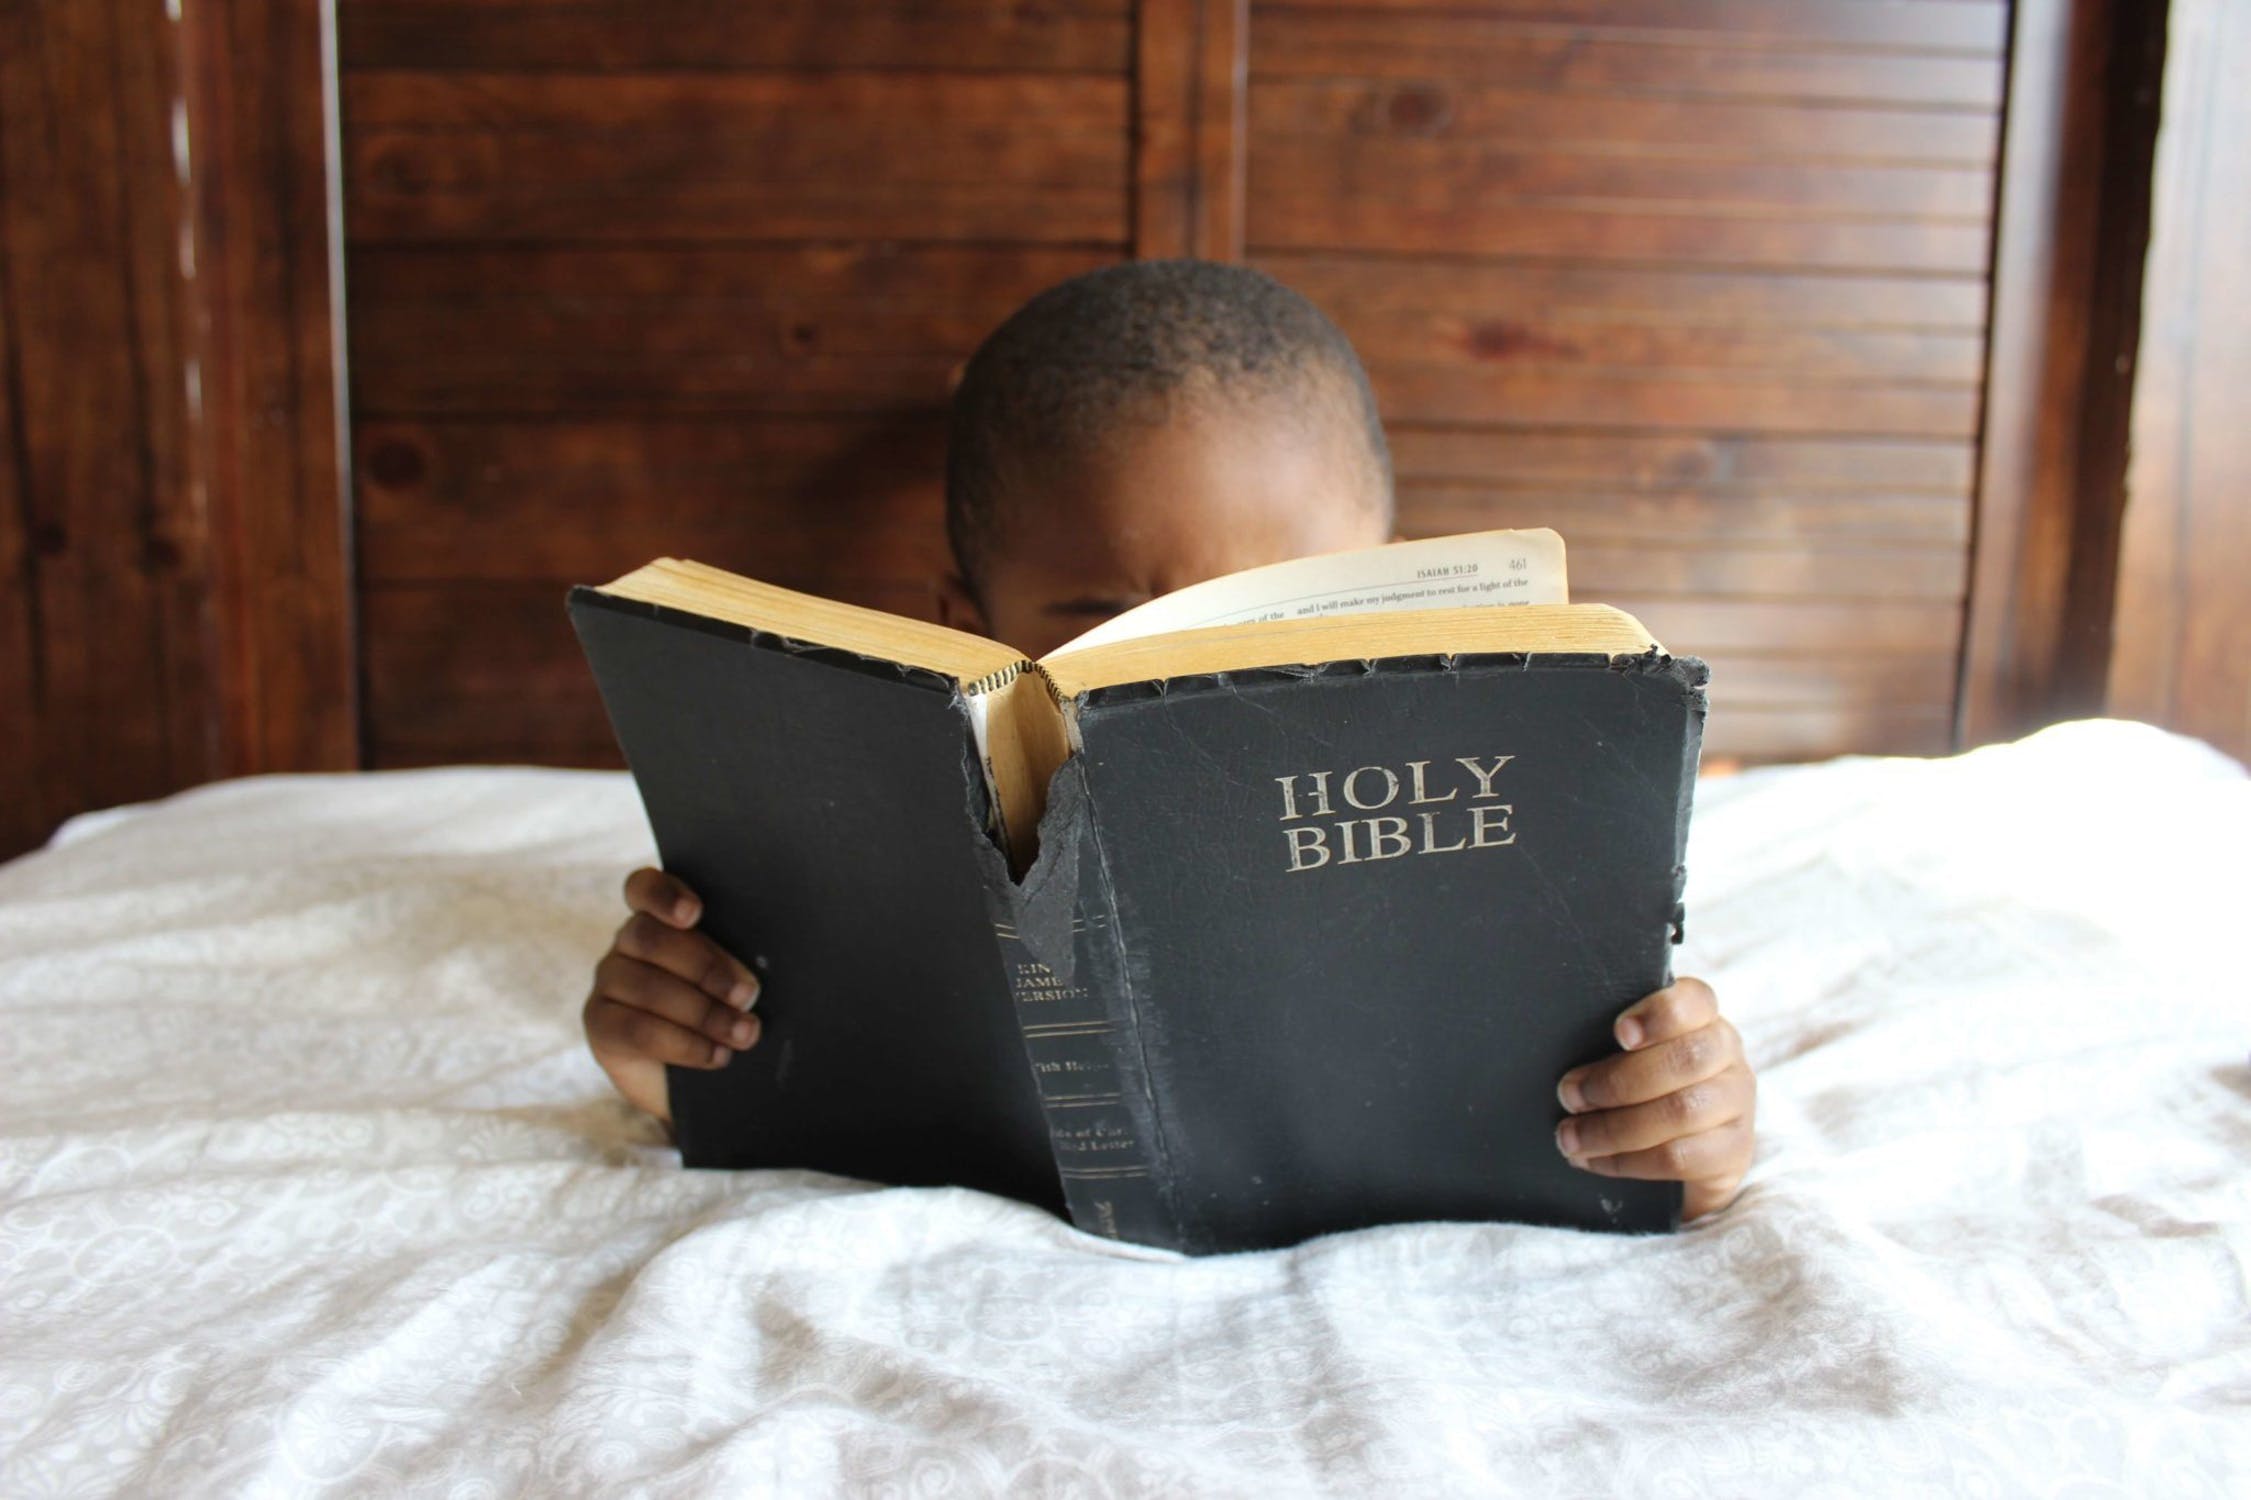 Carol Clemans – Does Your Youth Know God’s Word?